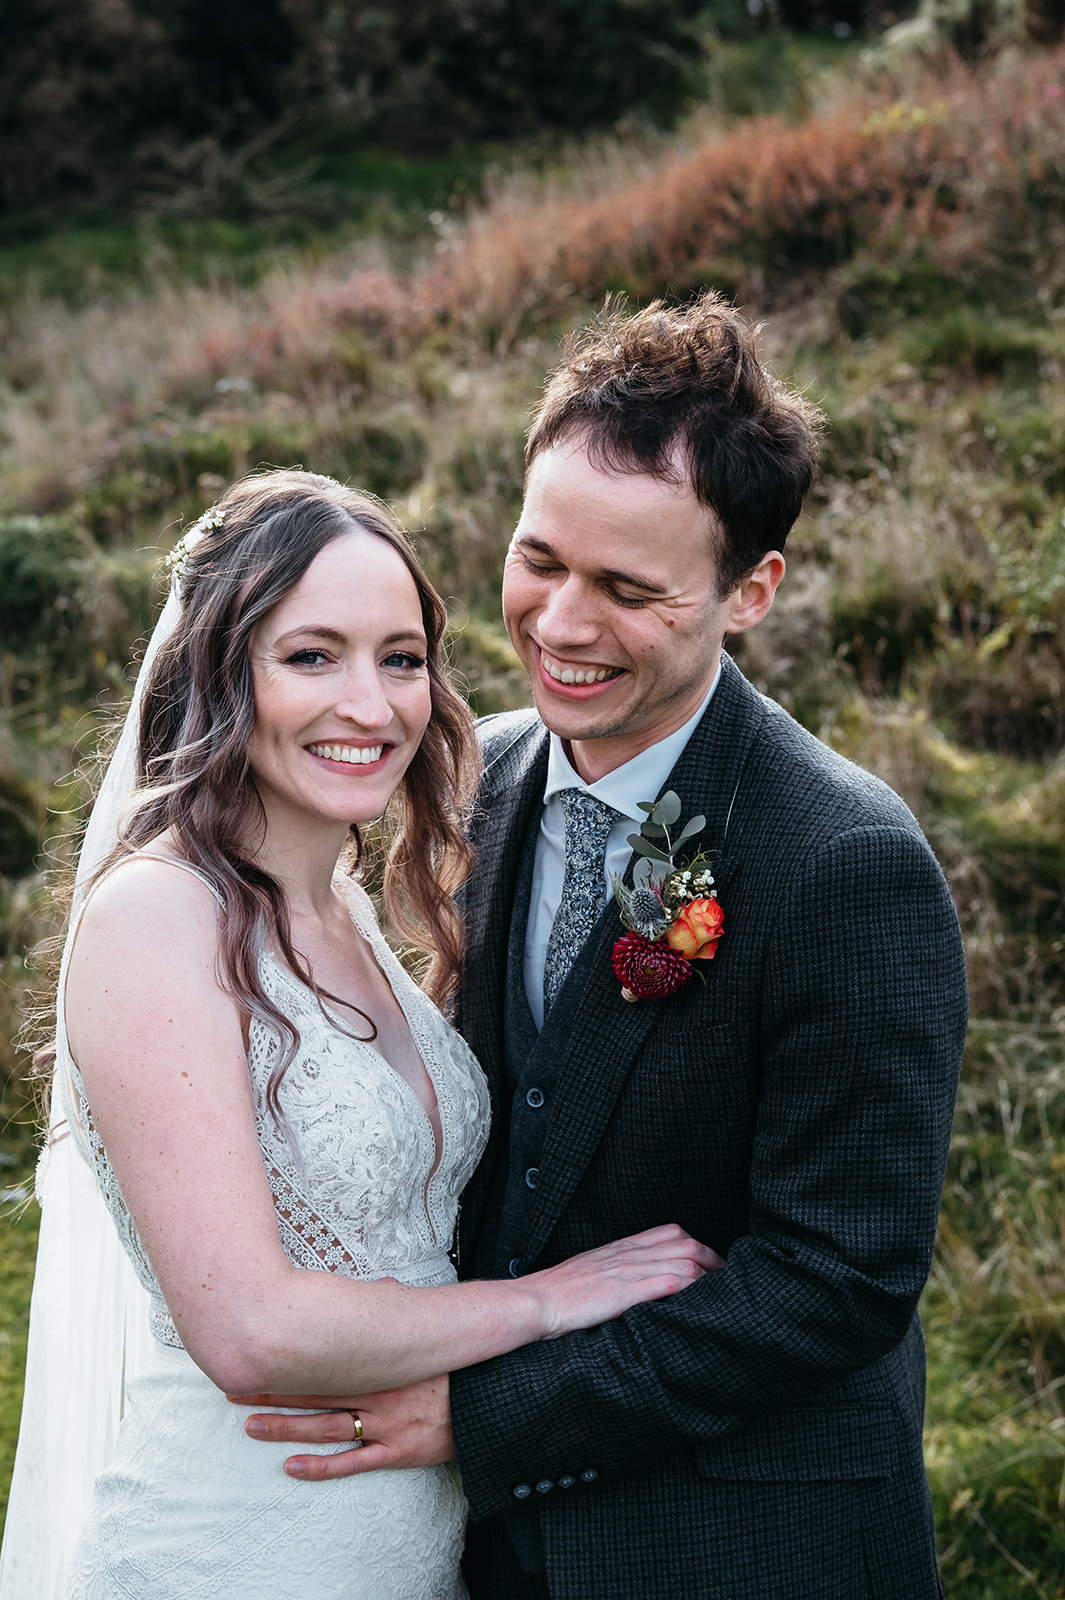 Romantic portrait of Adelle and Ric, the bride and groom, sharing a tender moment together in Danby Castle